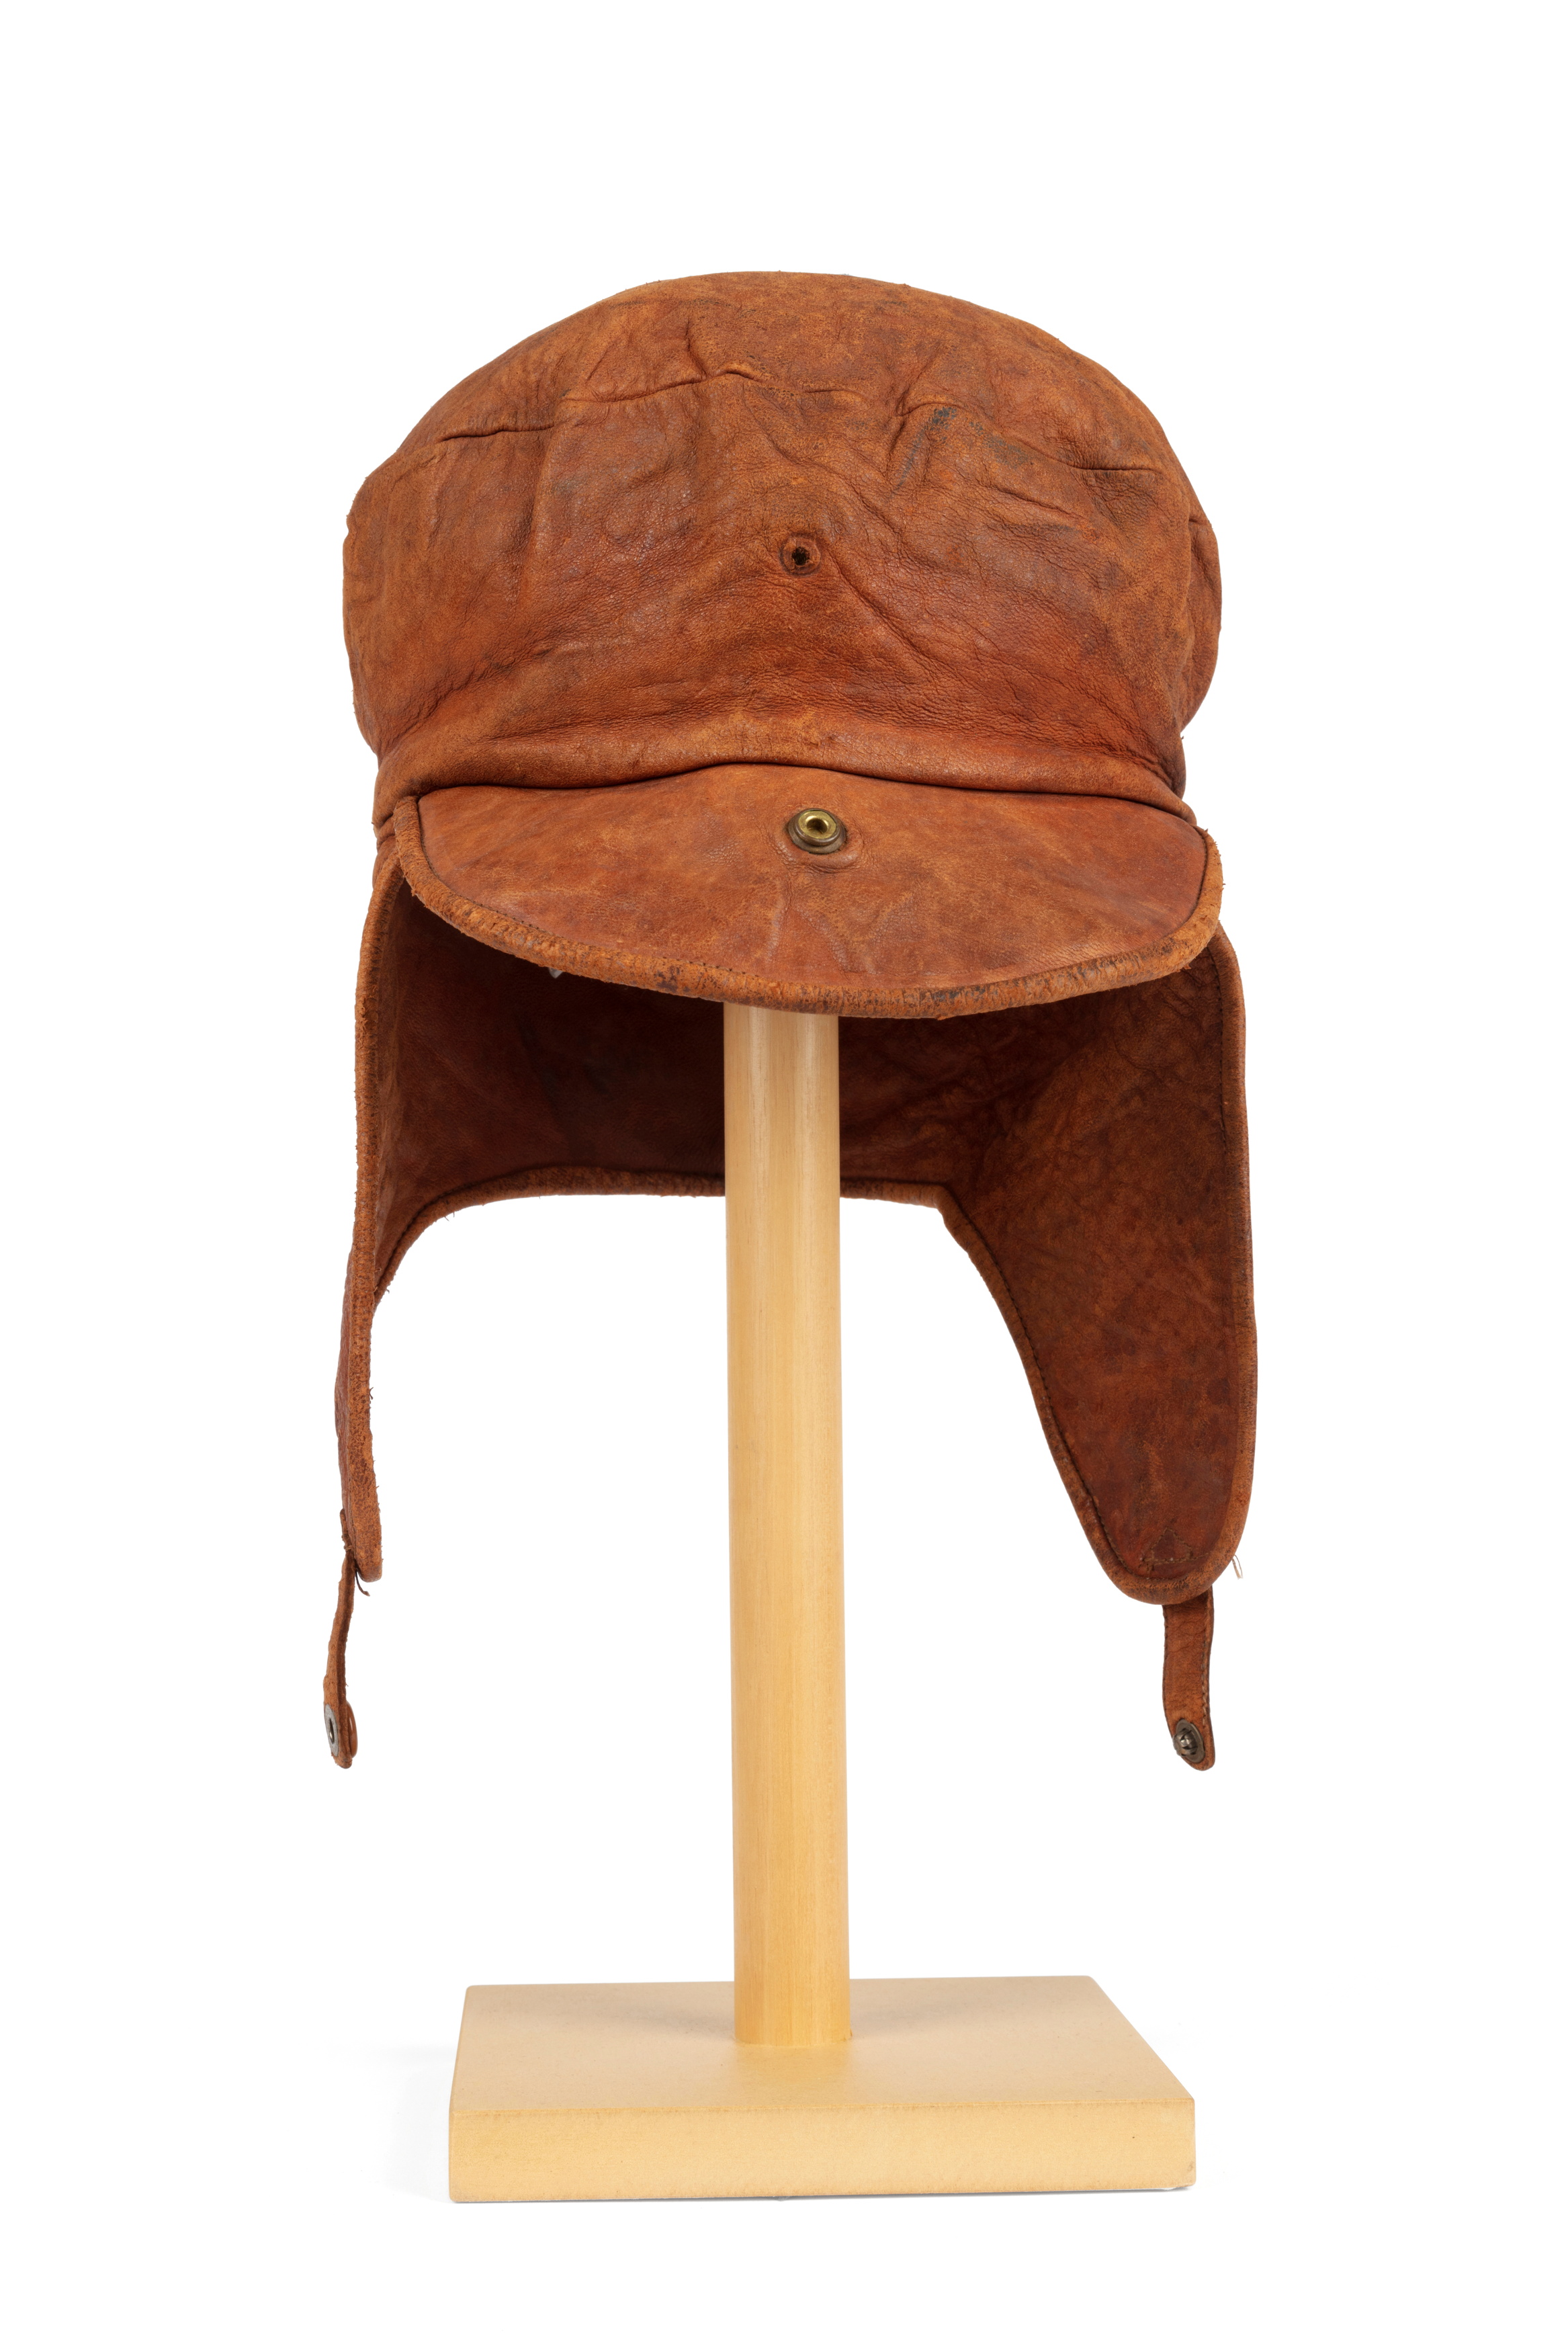 Aviator flying cap worn by Millicent Bryant